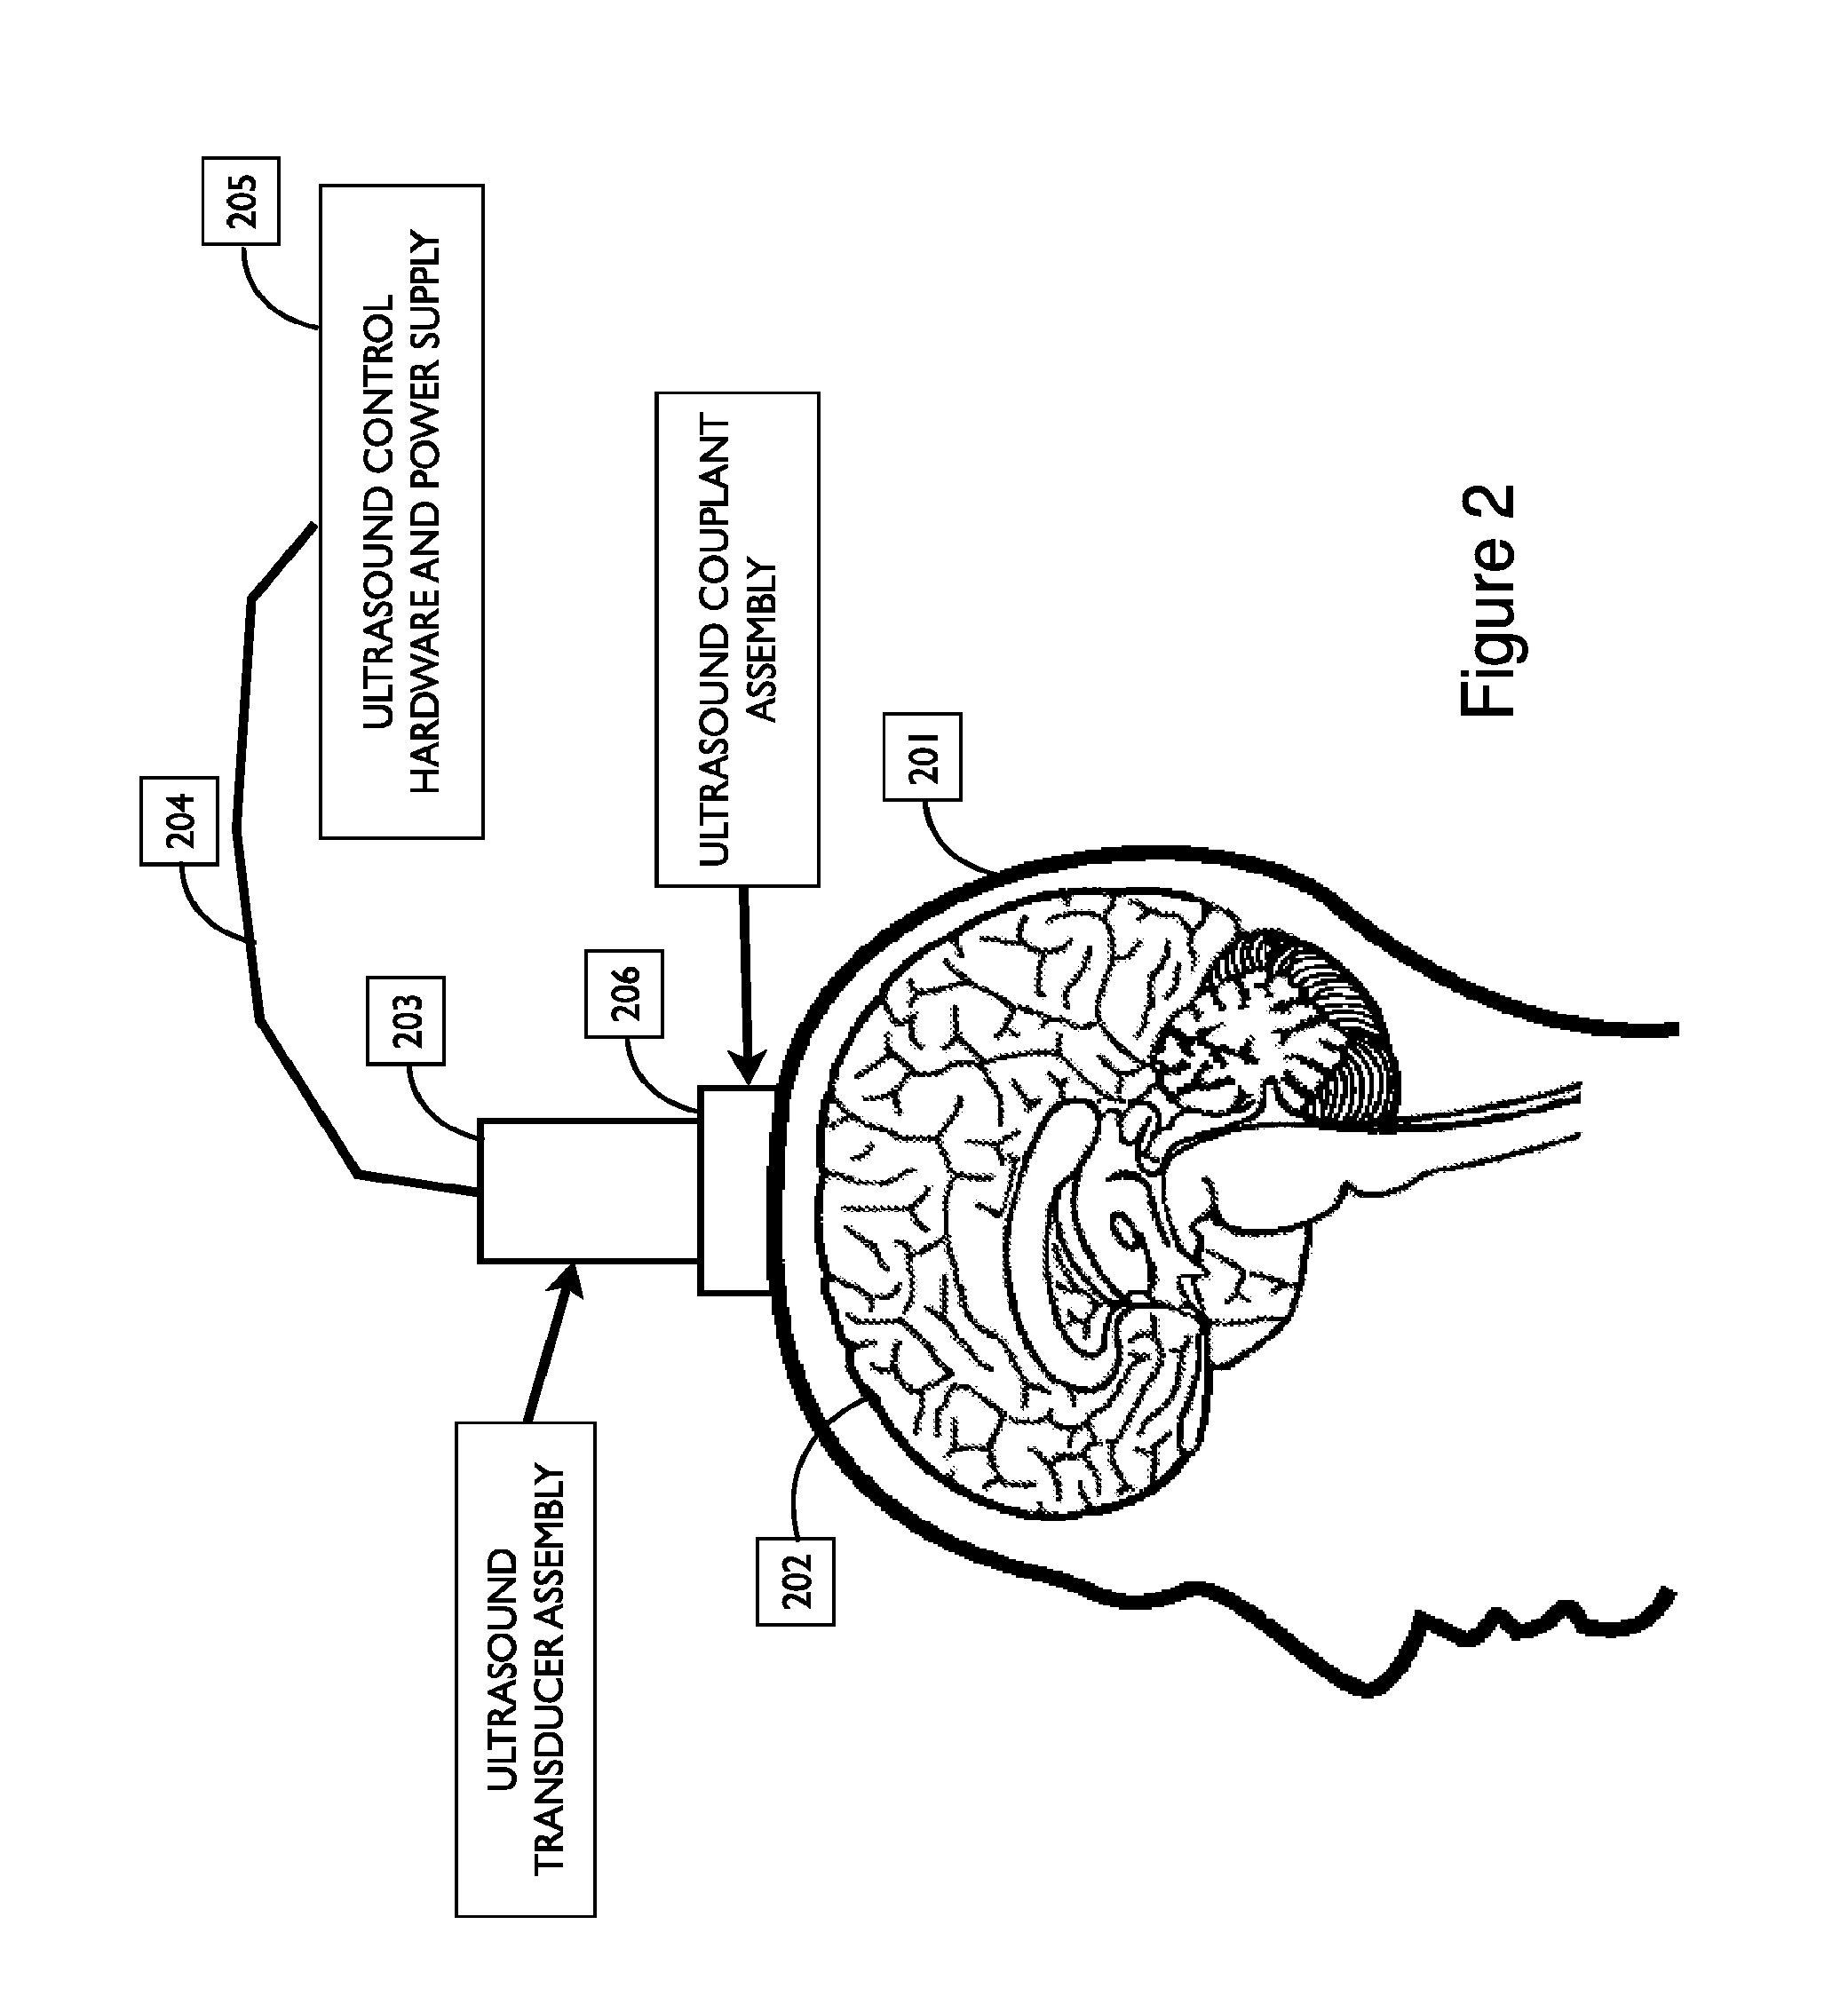 Systems and devices for coupling ultrasound energy to a body